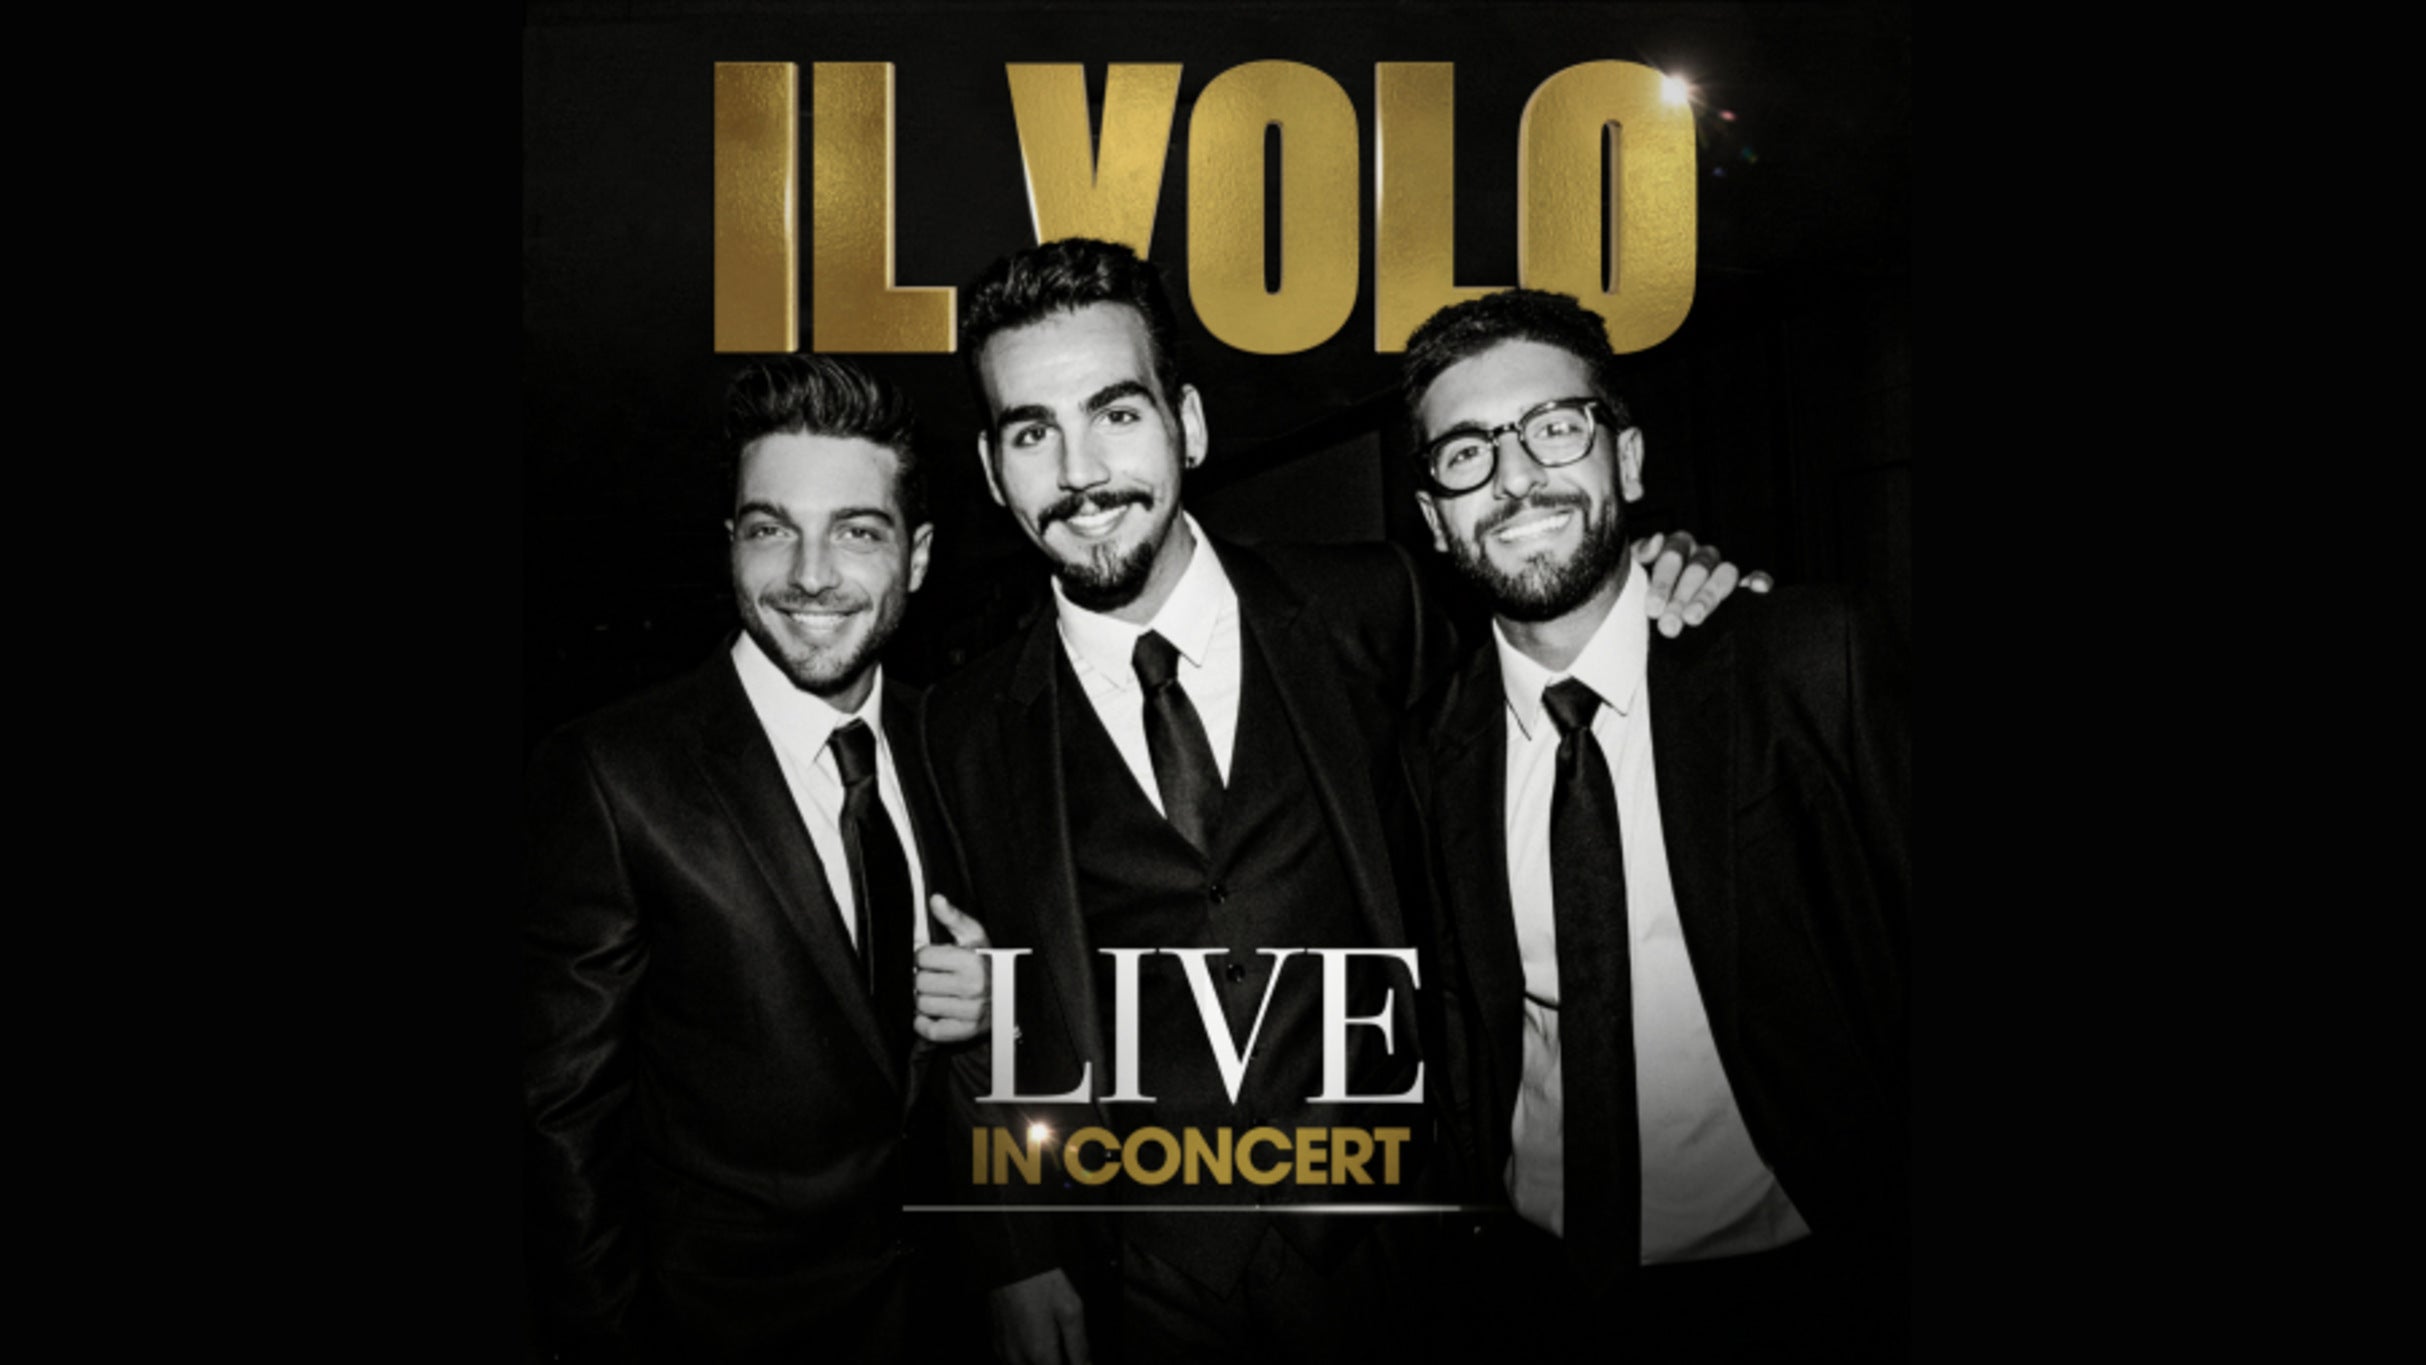 Image used with permission from Ticketmaster | Il Volo - Live In Concert tickets